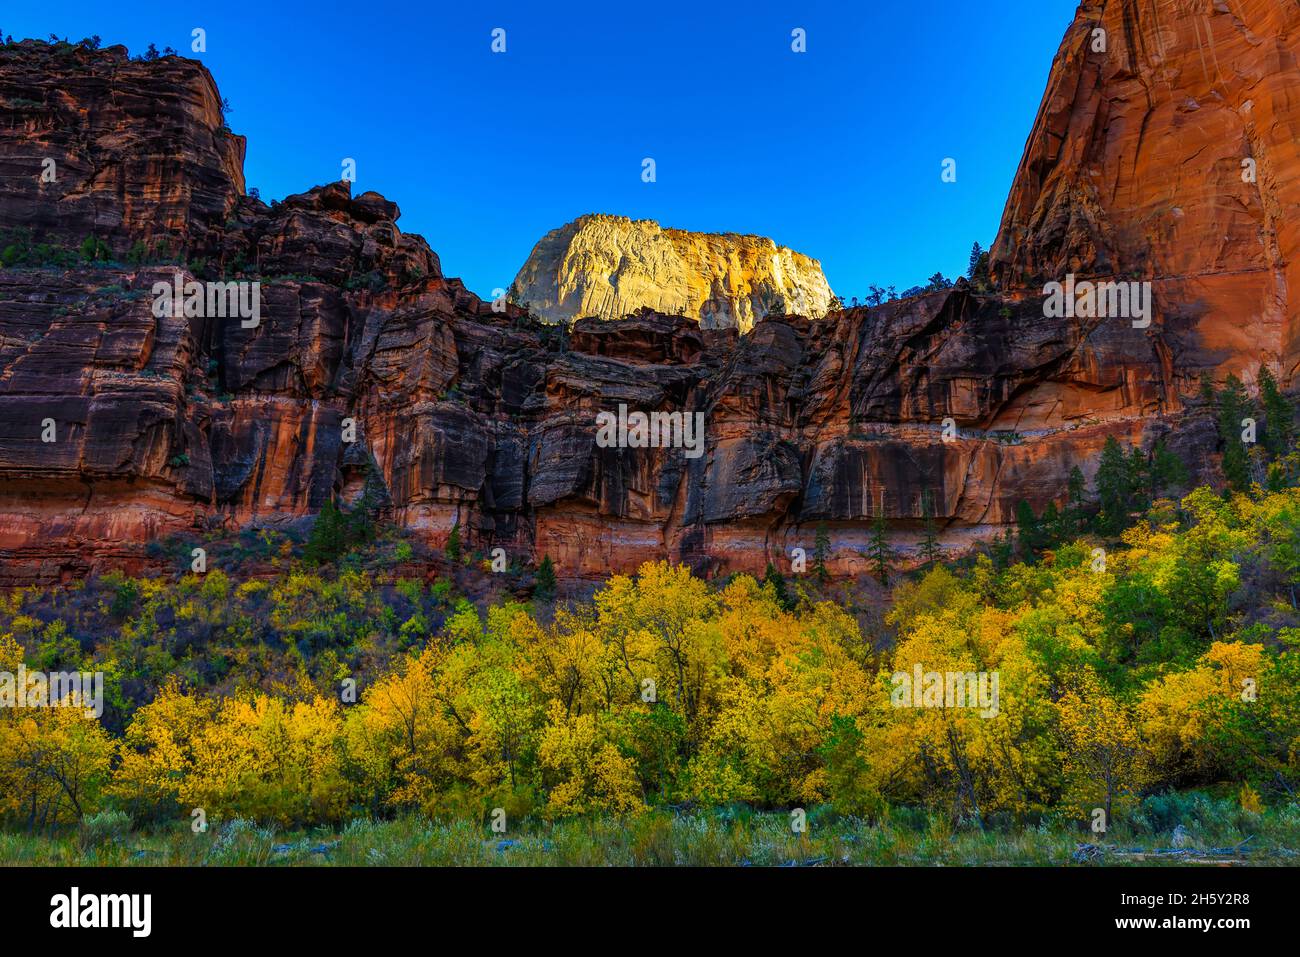 A view of the top of The Great White Throne and the fall colors in the Big Bend area in Zion National Park, Springdale, Washington County, Utah, USA. Stock Photo